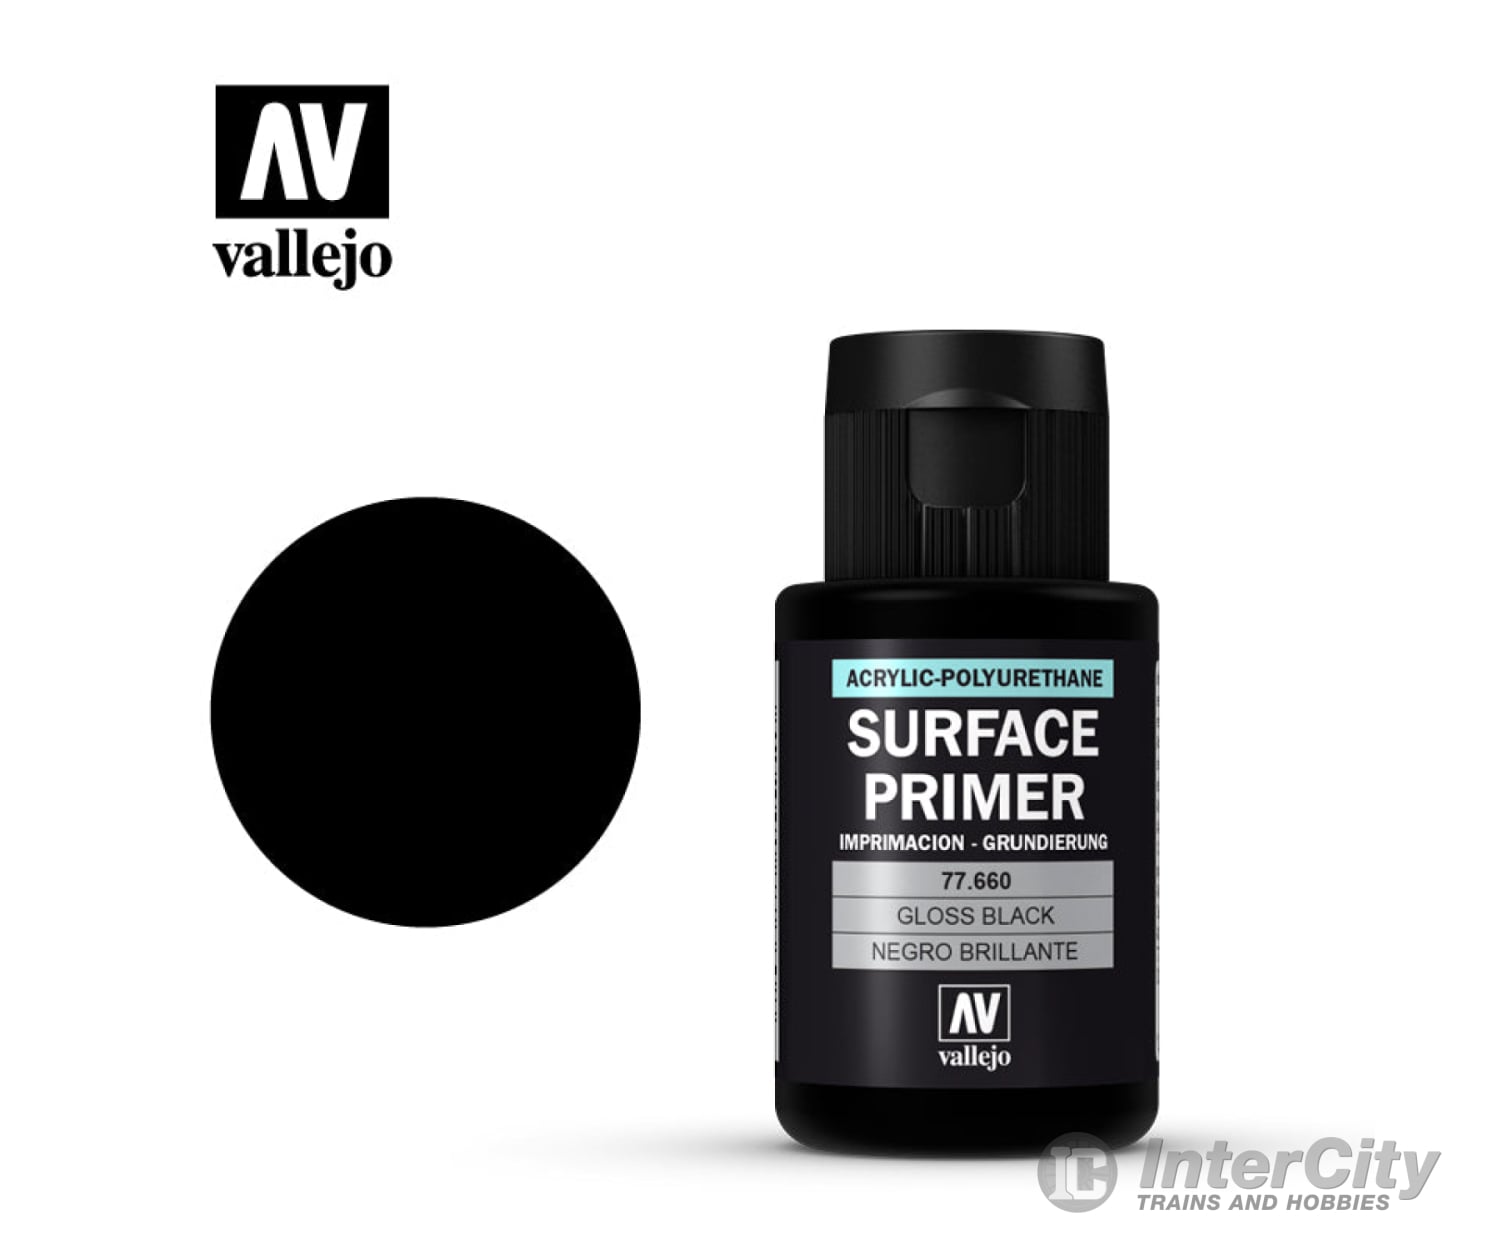 Metal Color 32ml. Modelism paint from Vallejo - Purchase online